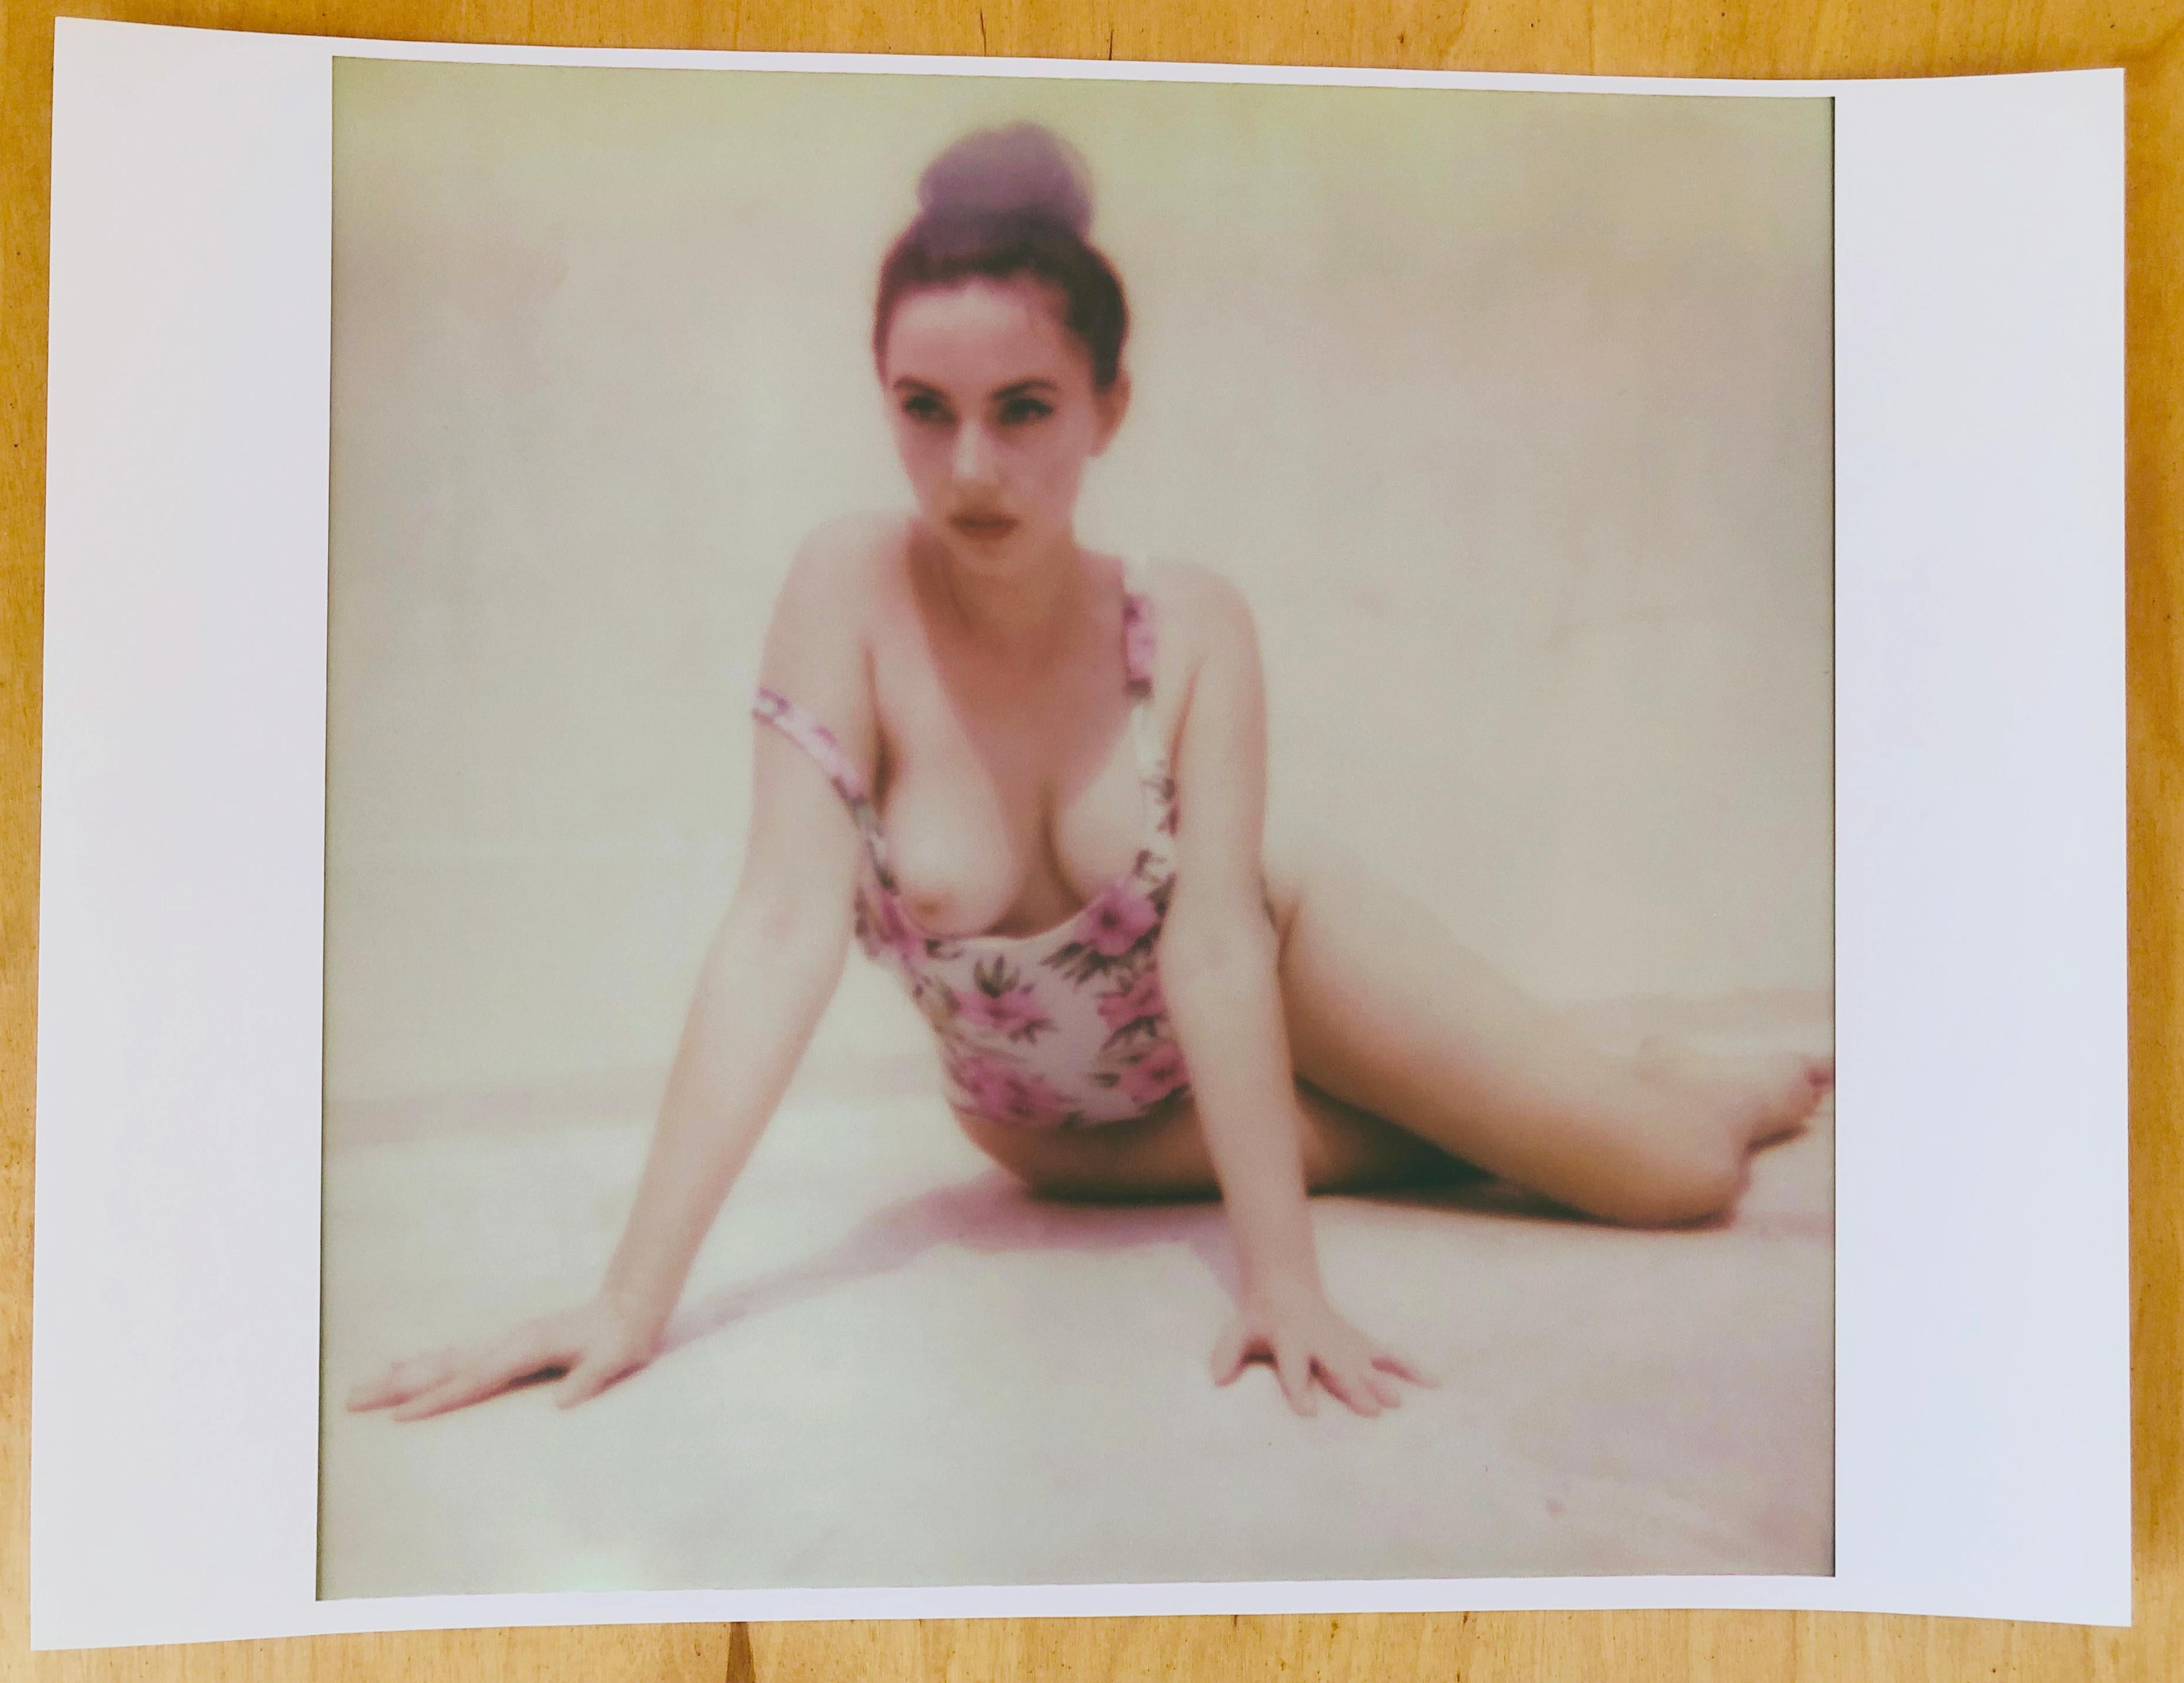 The Bathing Suit - Nude, Polaroid, Contemporary - Photograph by Sven van Driessche